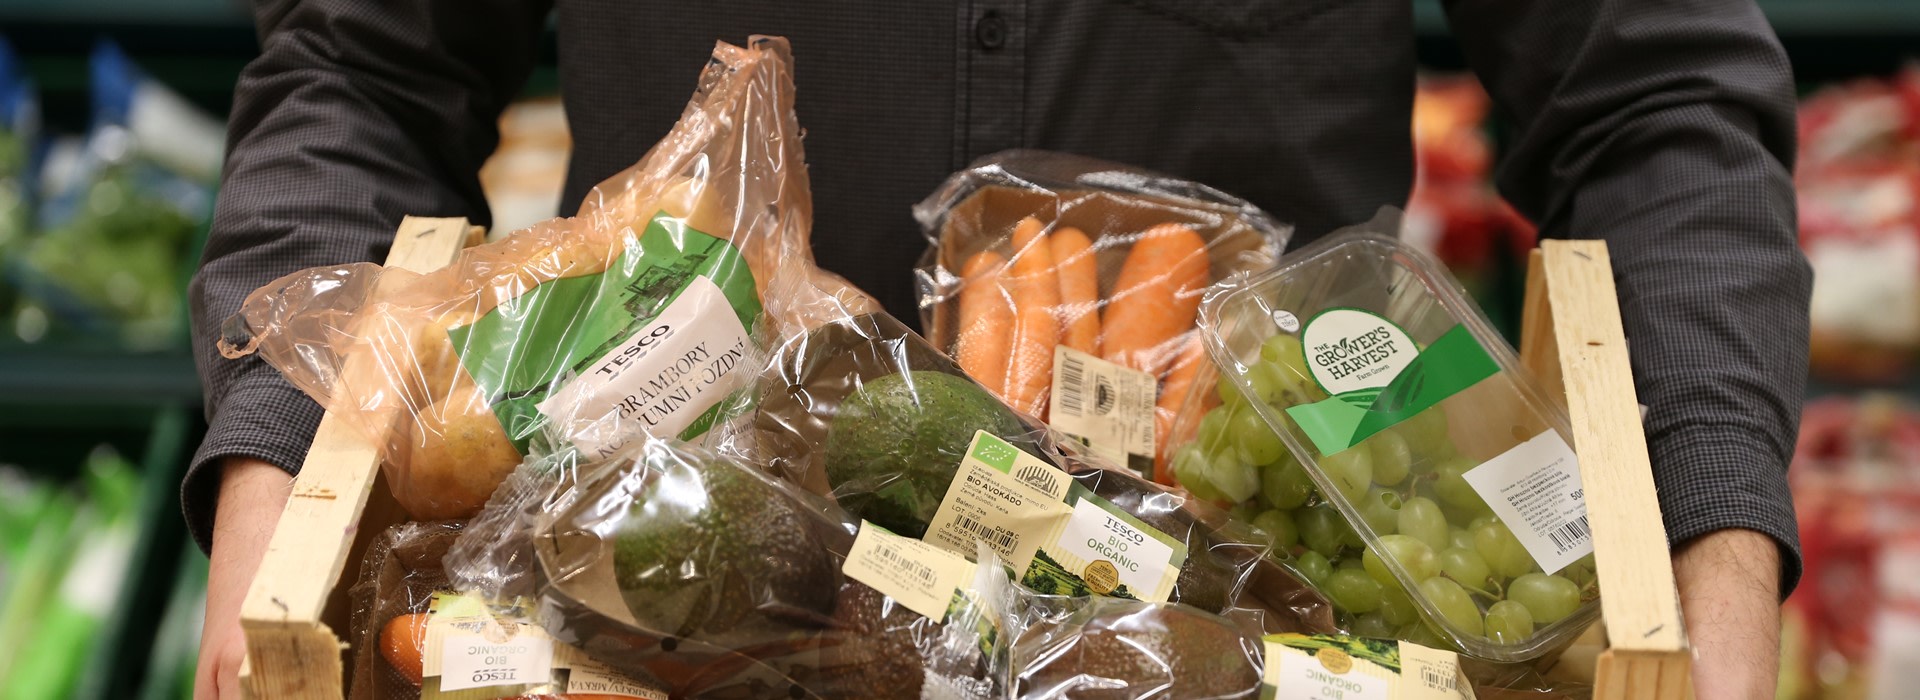 Tesco now sells fruits and vegetables in 100% recyclable packaging